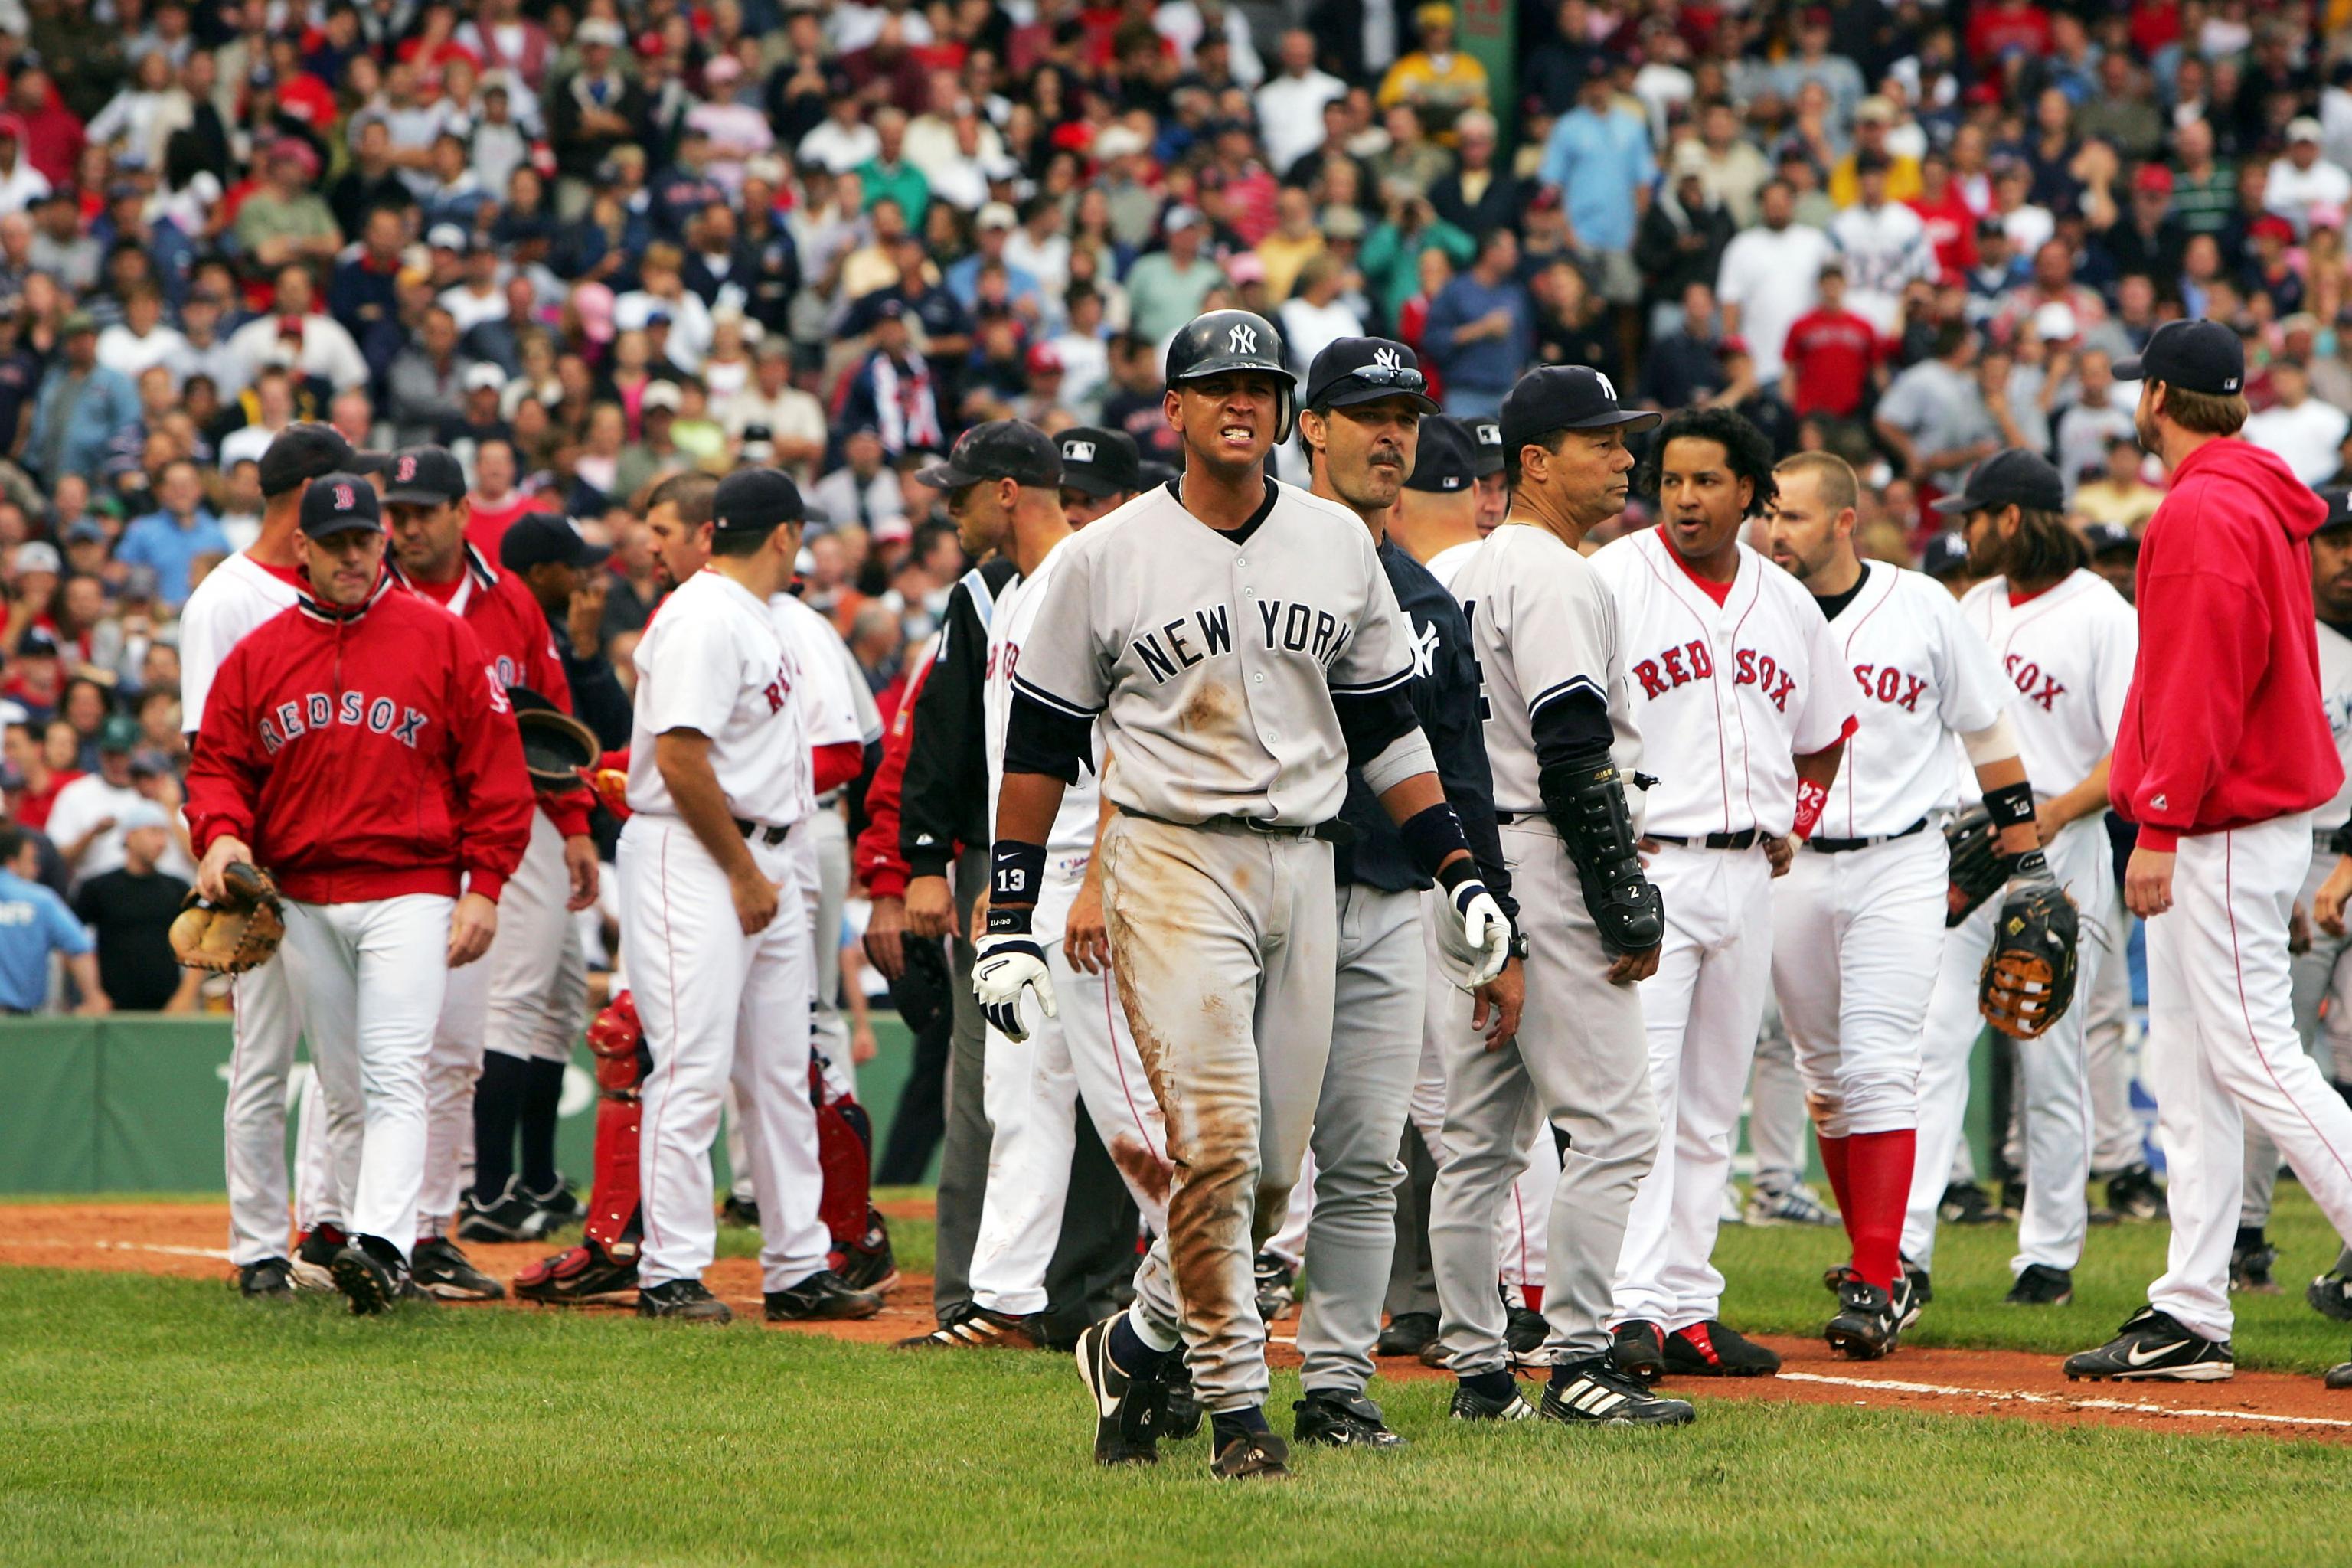 10 Years Ago Today: The 2004 Red Sox Comeback Through More Mature